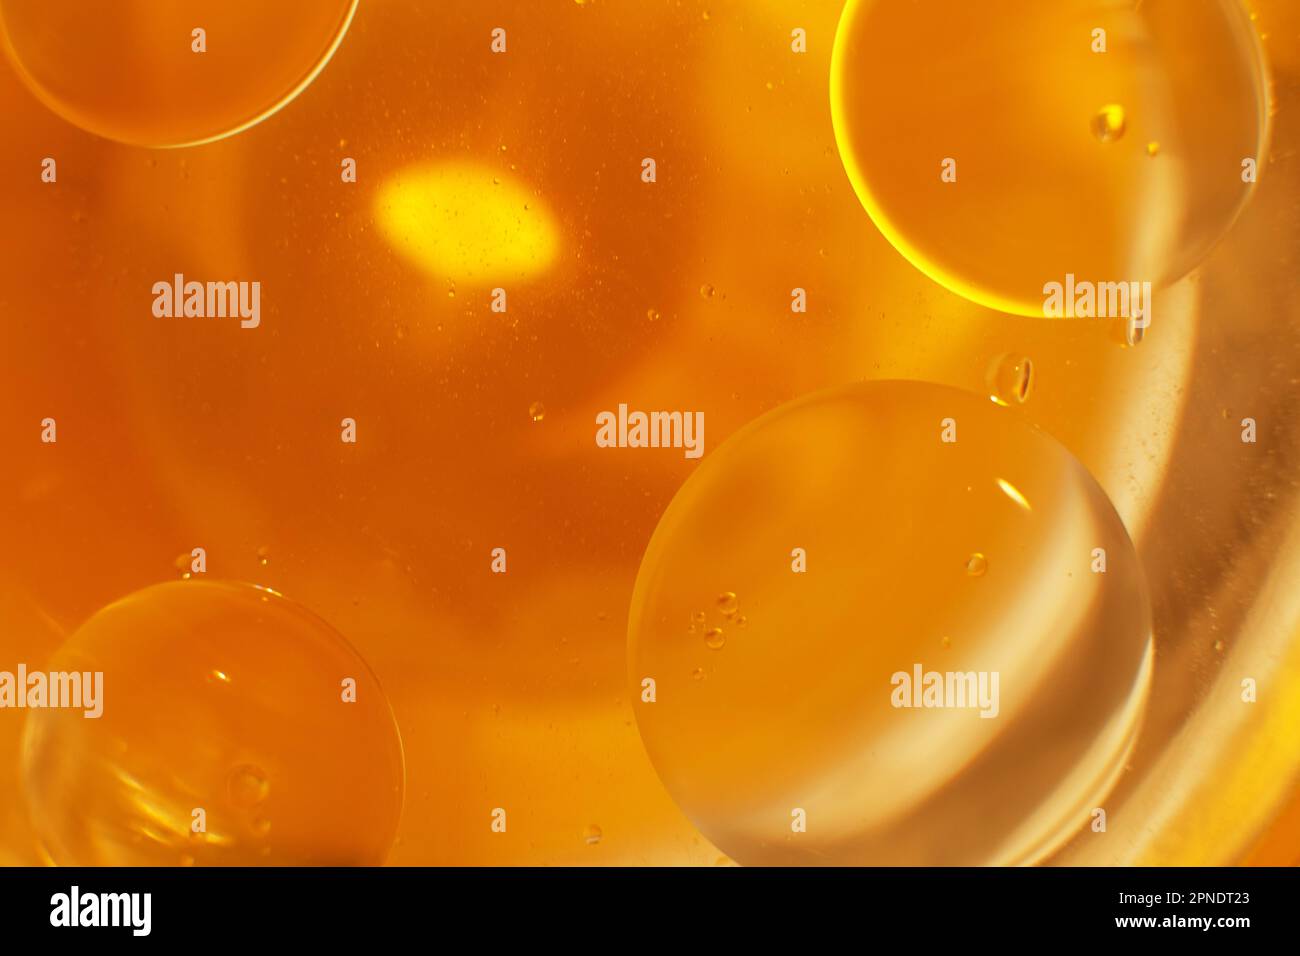 Gold Oil bubbles close up. circles of orange water macro. abstract shiny yellow background. Stock Photo